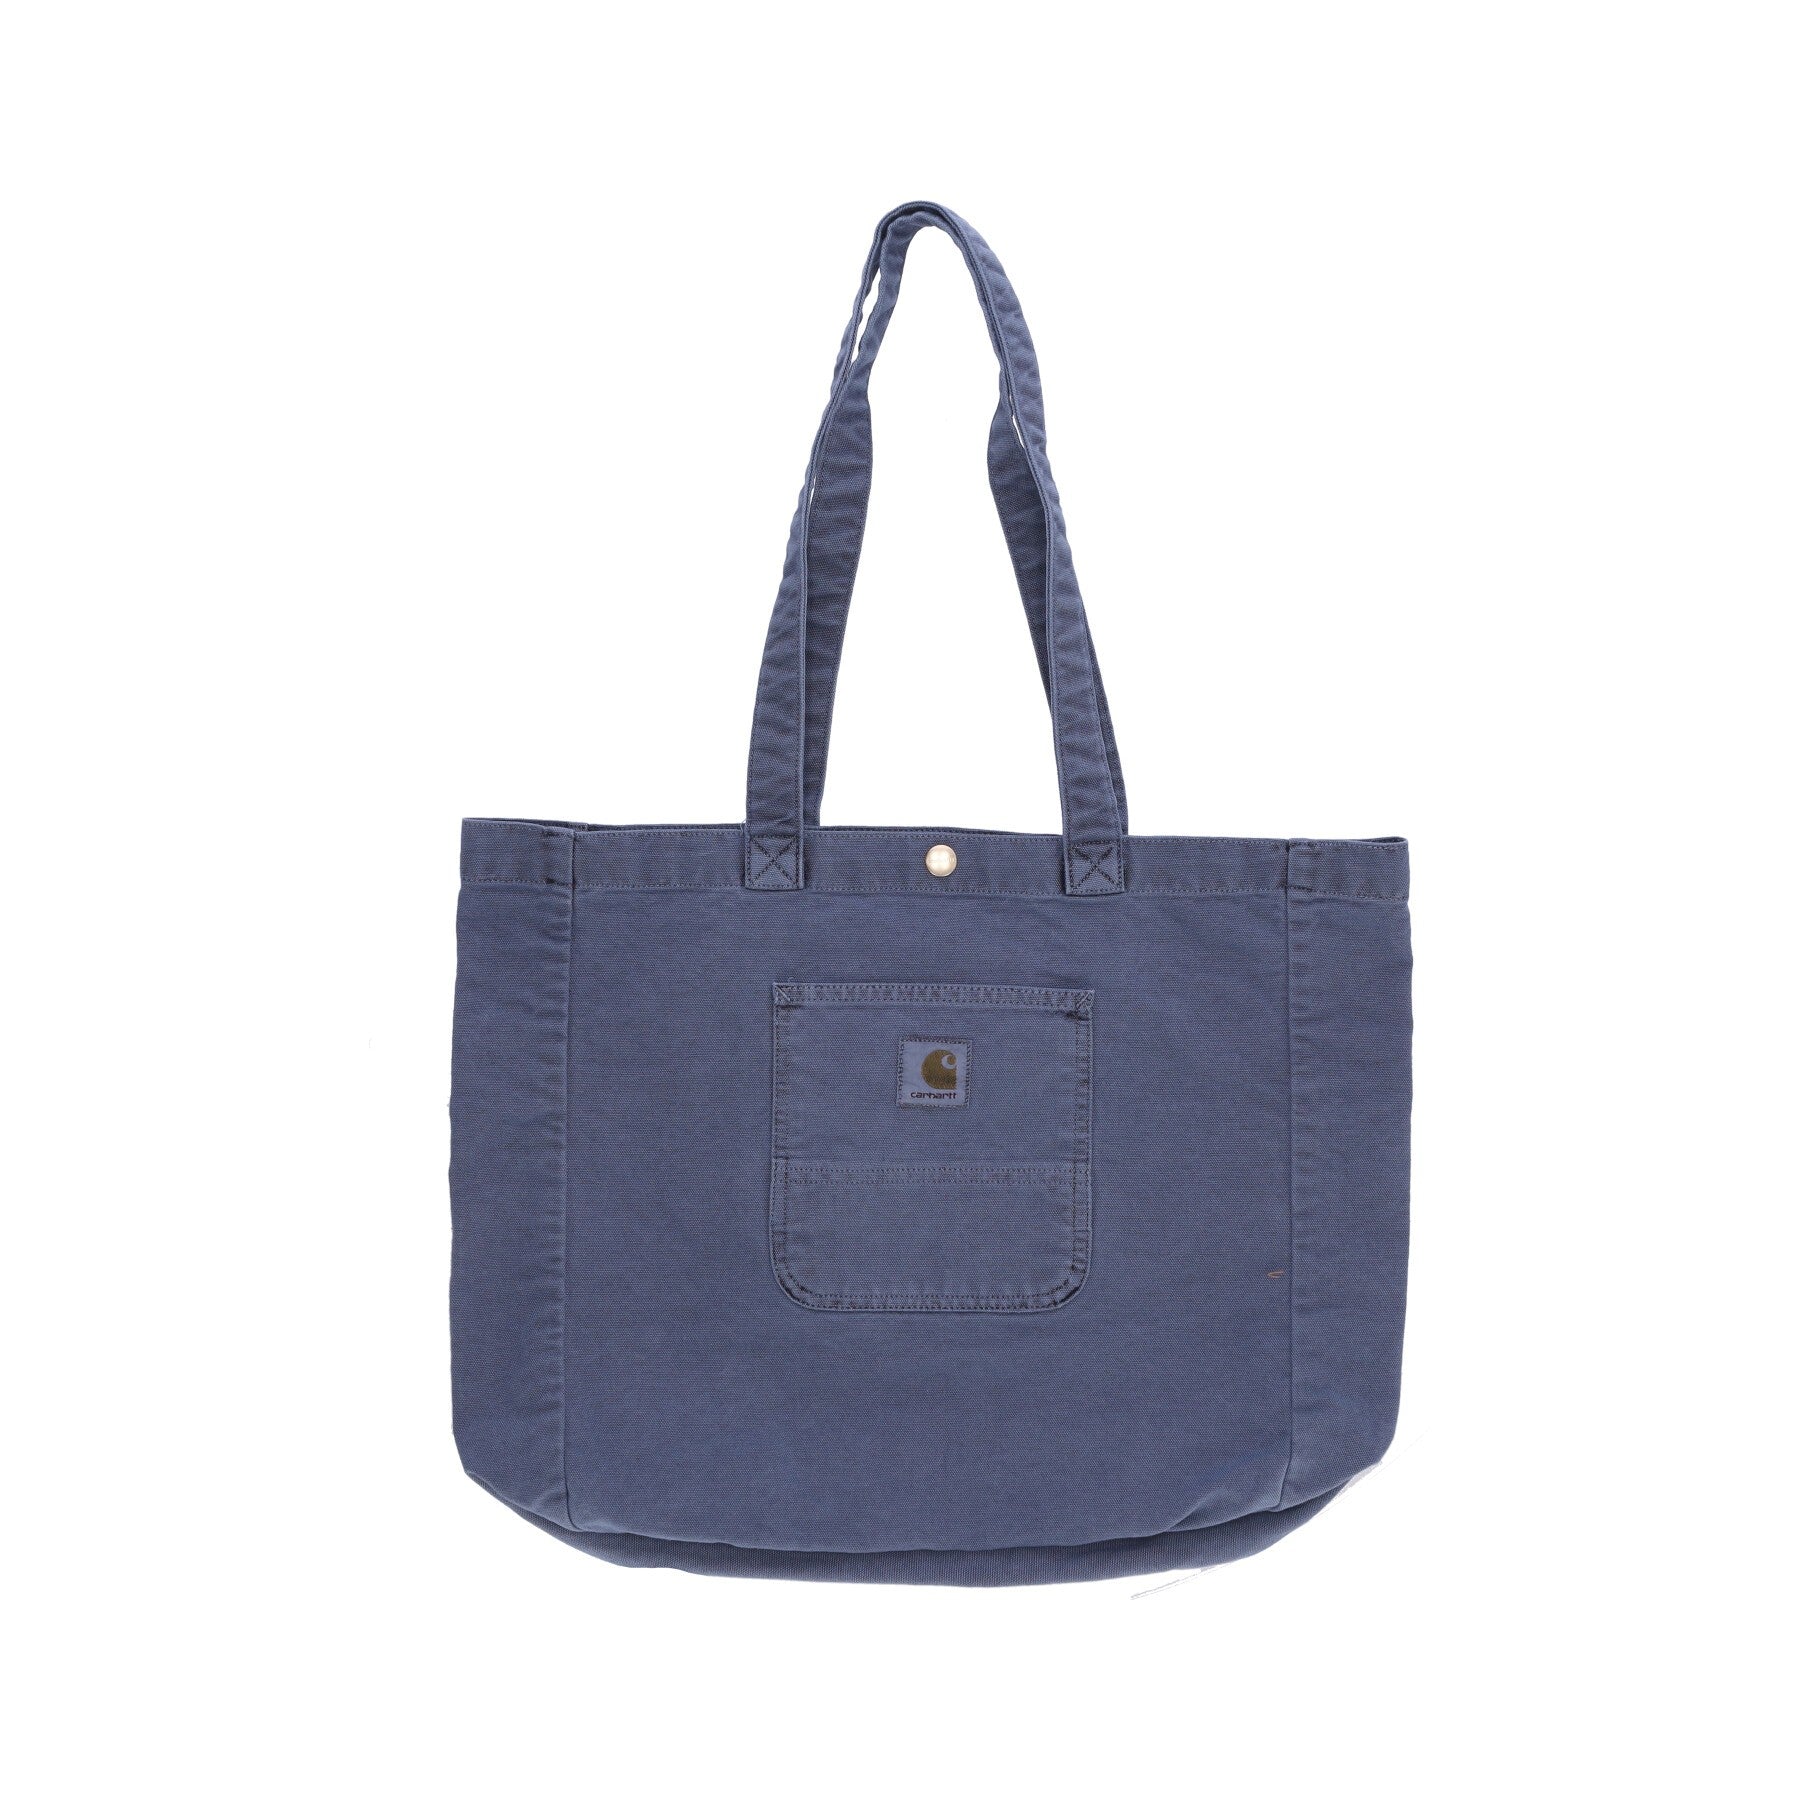 Bayfield Men's Tote Bag Storm Blue Faded